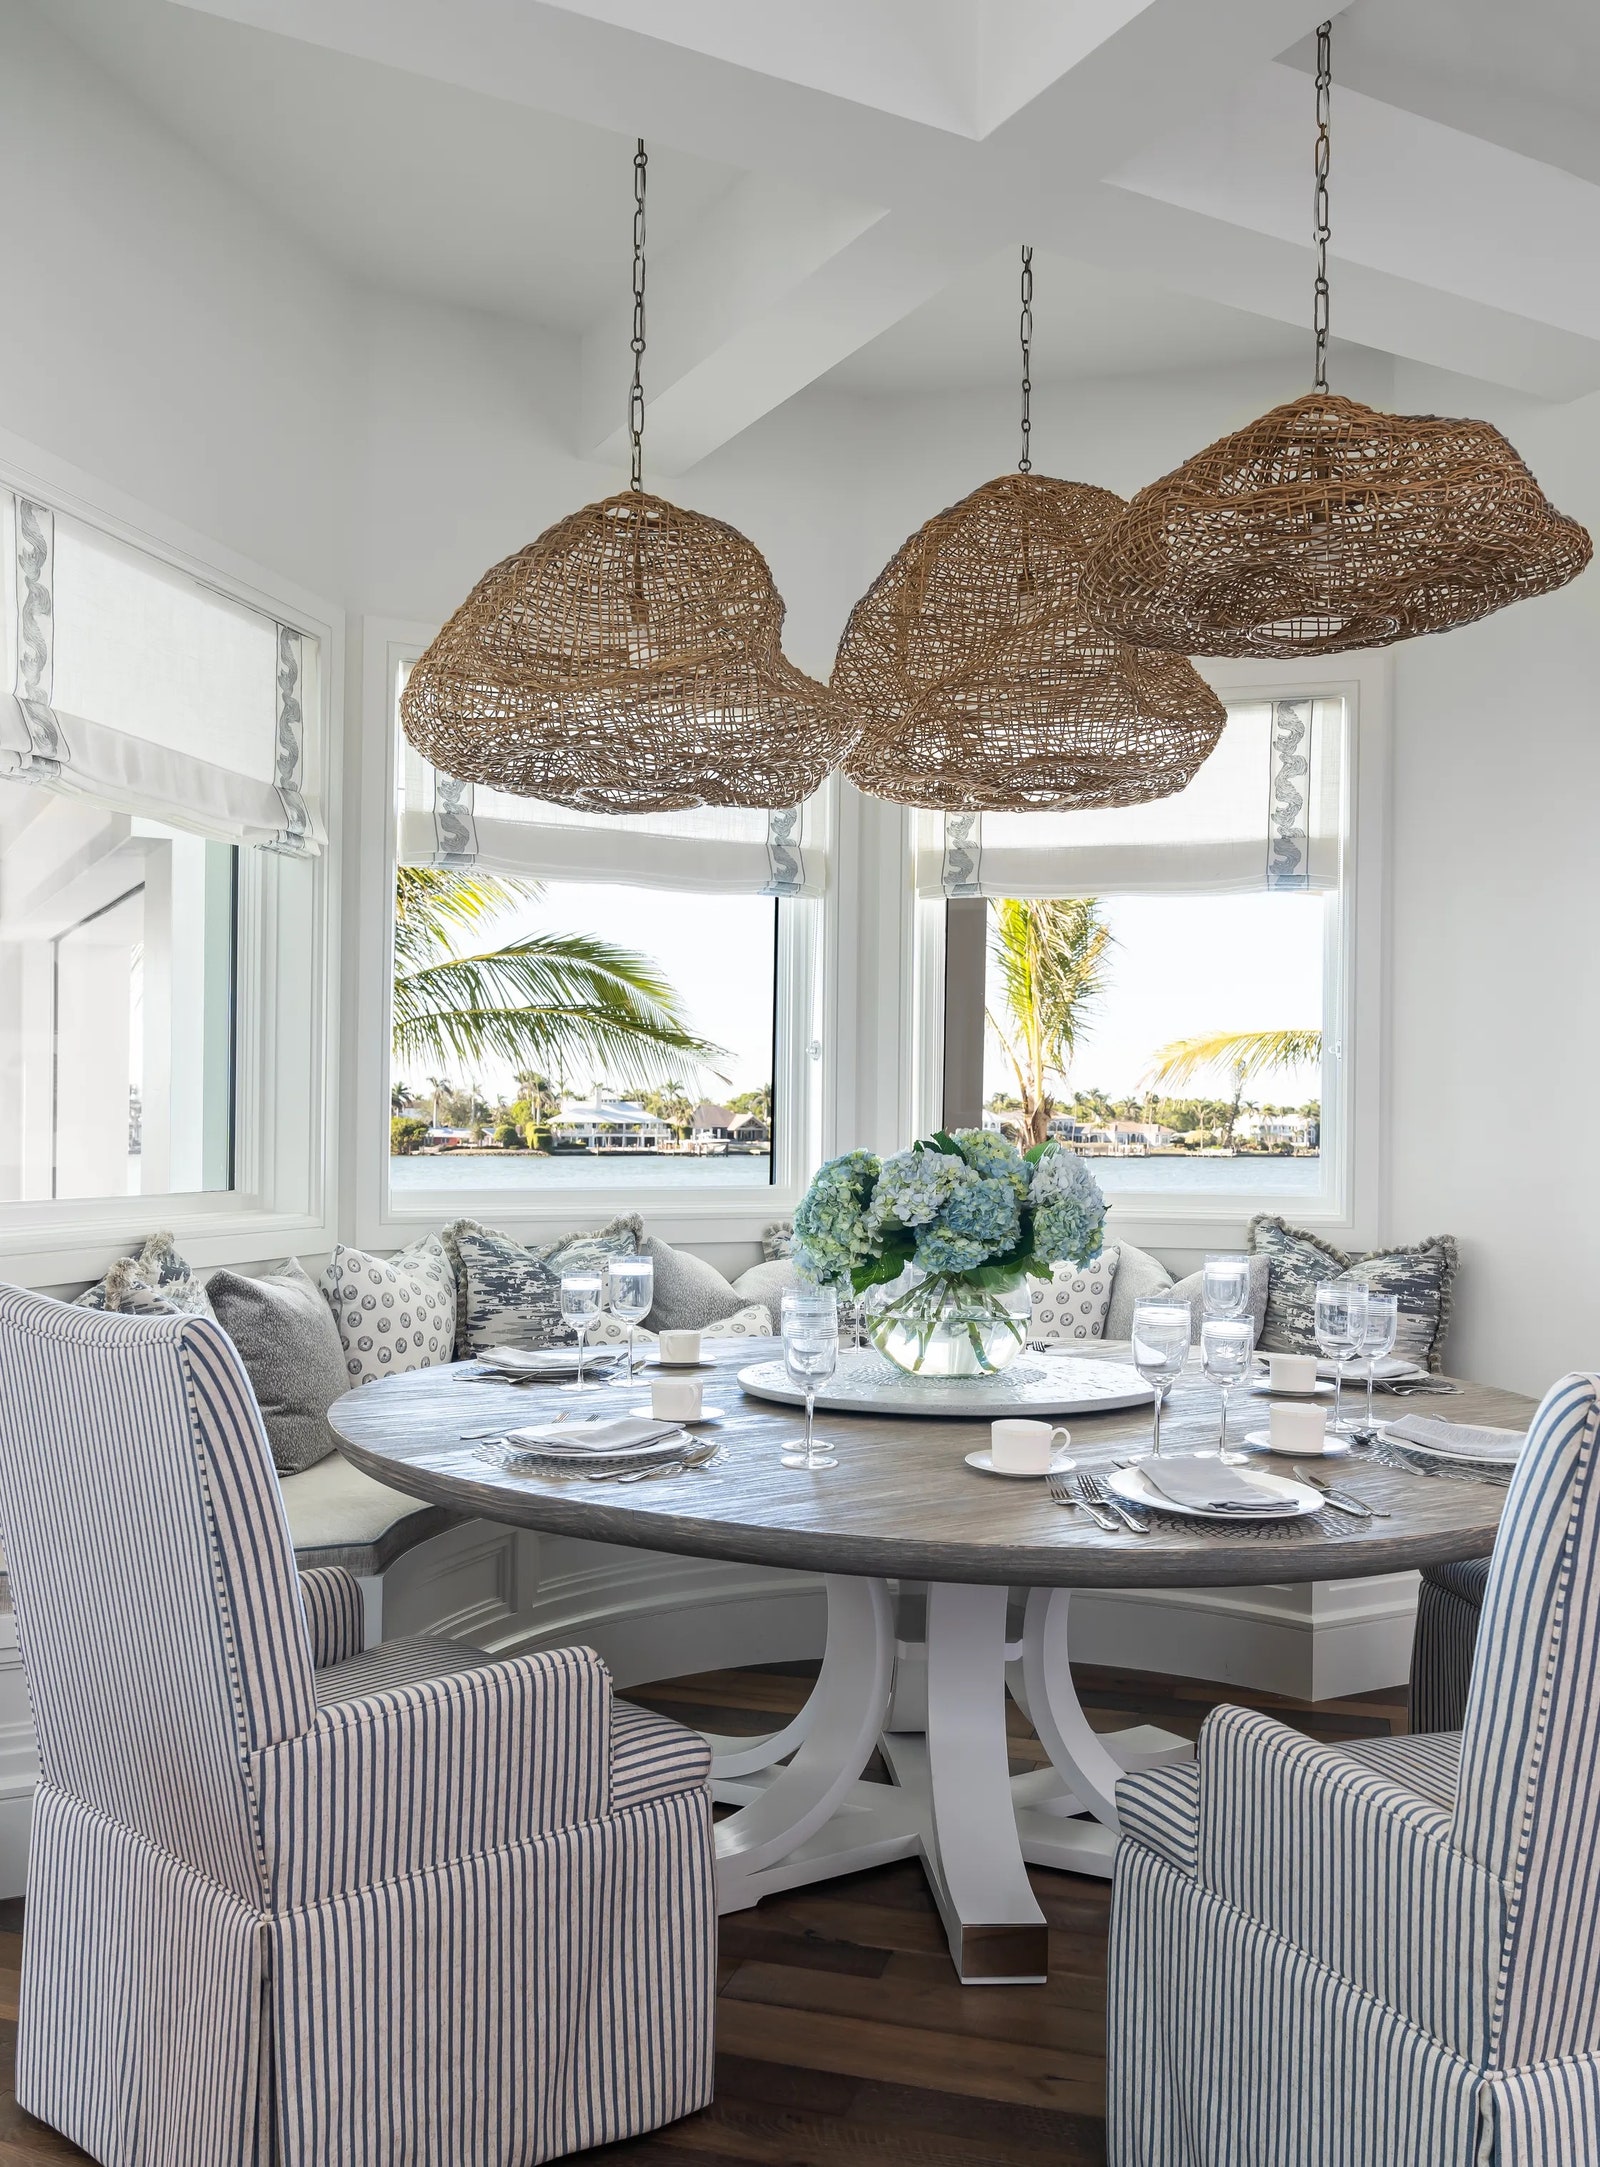 In a Florida project by Design West a customdesigned breakfast nook overlooks the breathtaking Naples Bay.